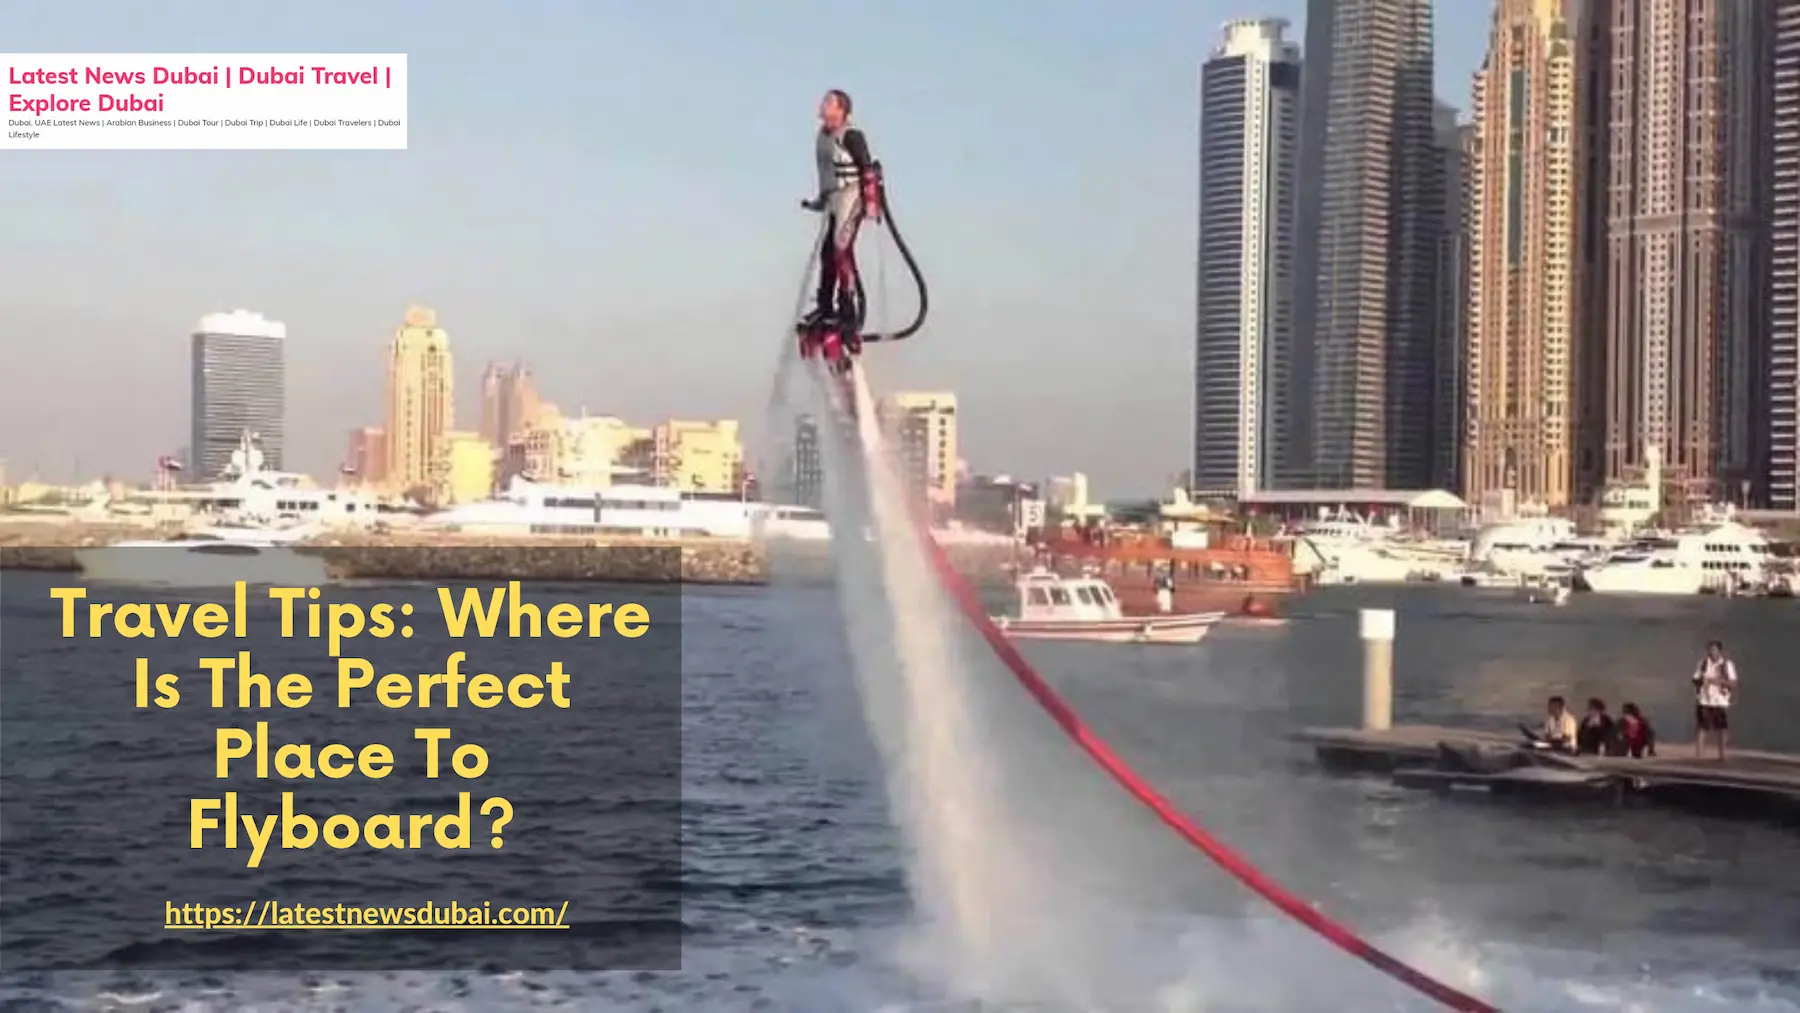 Perfect Place To Flyboard